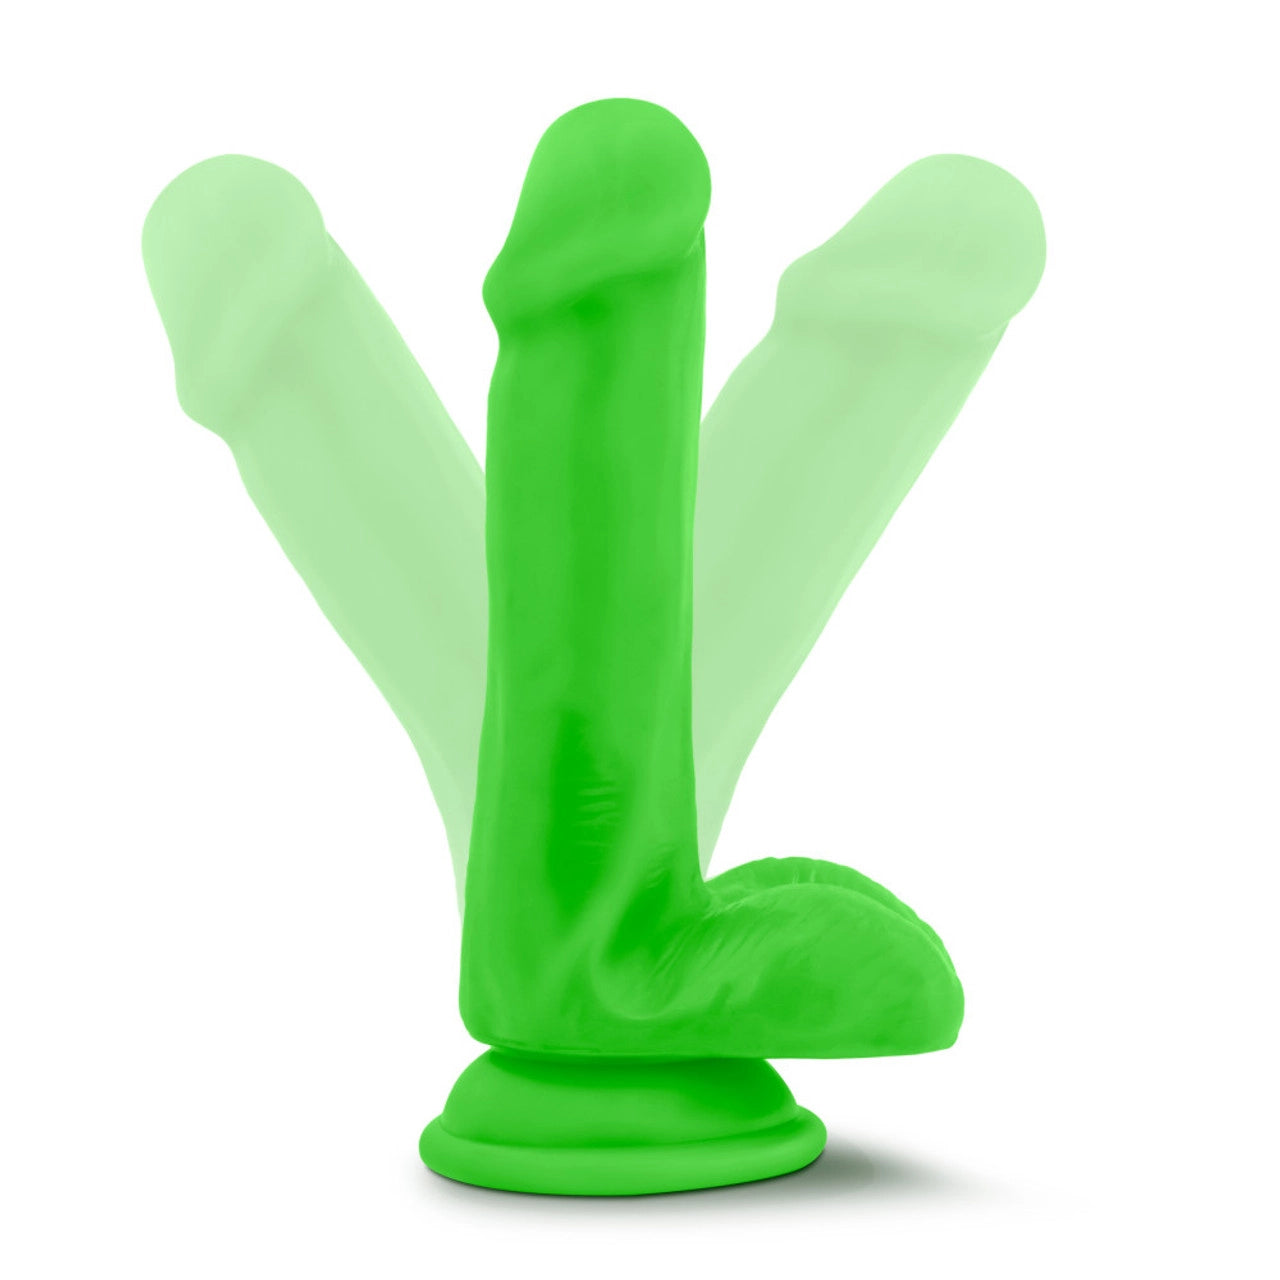 Neo Elite 6 inch Silicone Dual Density Cock with Balls -  Green/Pink